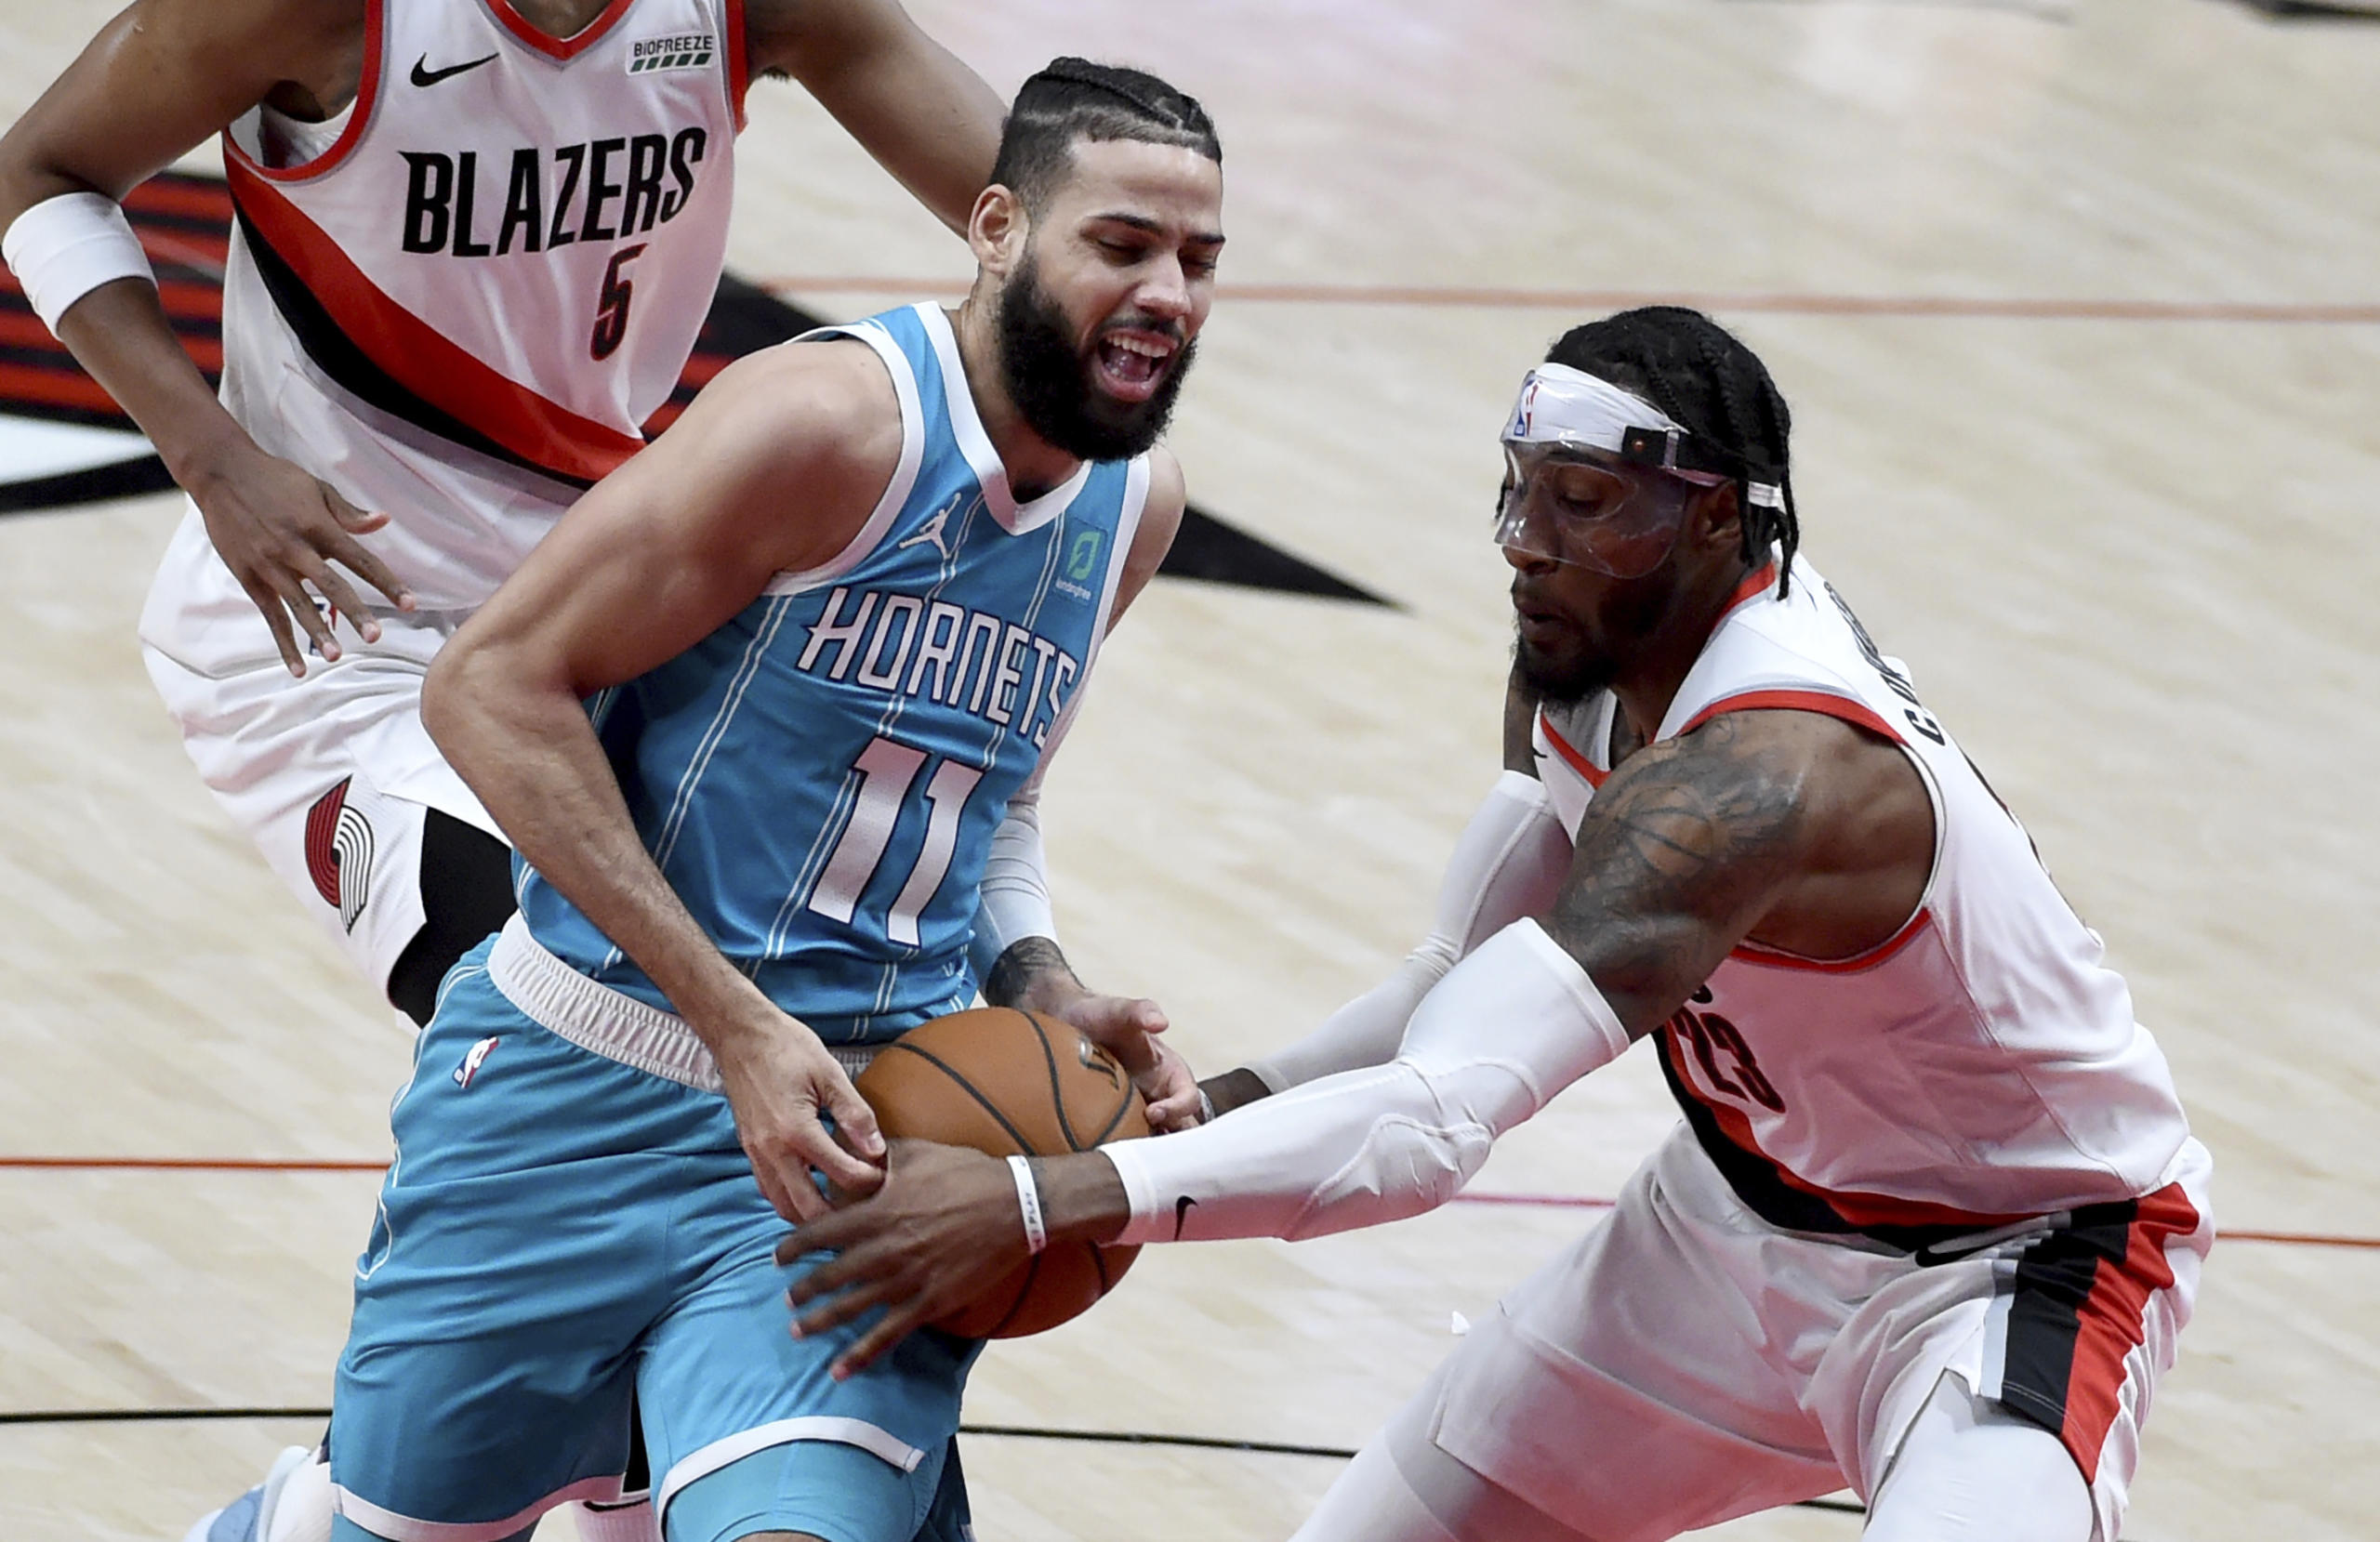 Portland Trail Blazers forward Robert Covington, right, grabs the ball away from Charlotte Hornets forward Cody Martin, left, during the first half of an NBA basketball game in Portland, Ore., Monday, March 1, 2021.